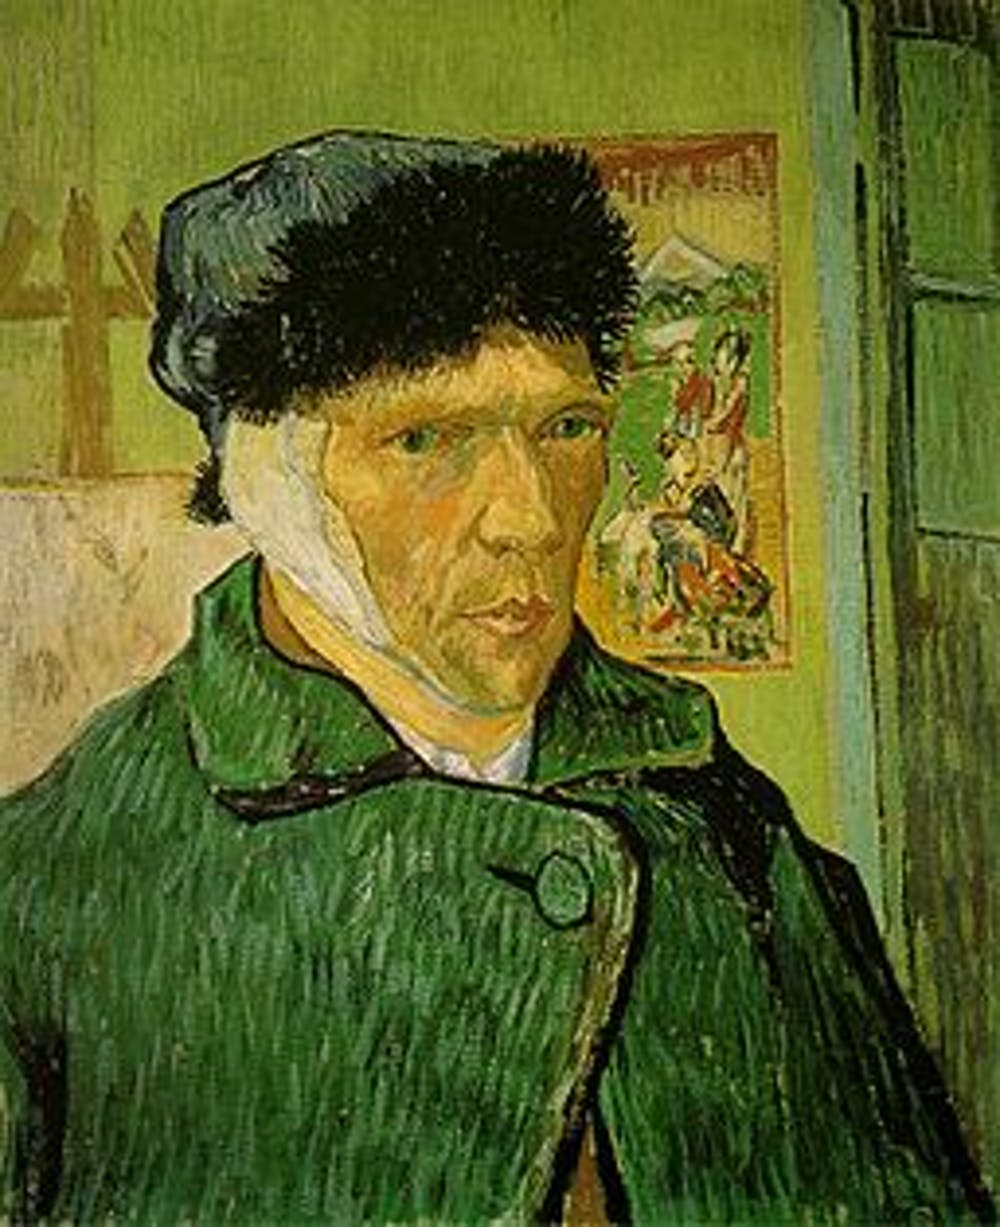 van Gogh self portrait with bandaged ear theconversation